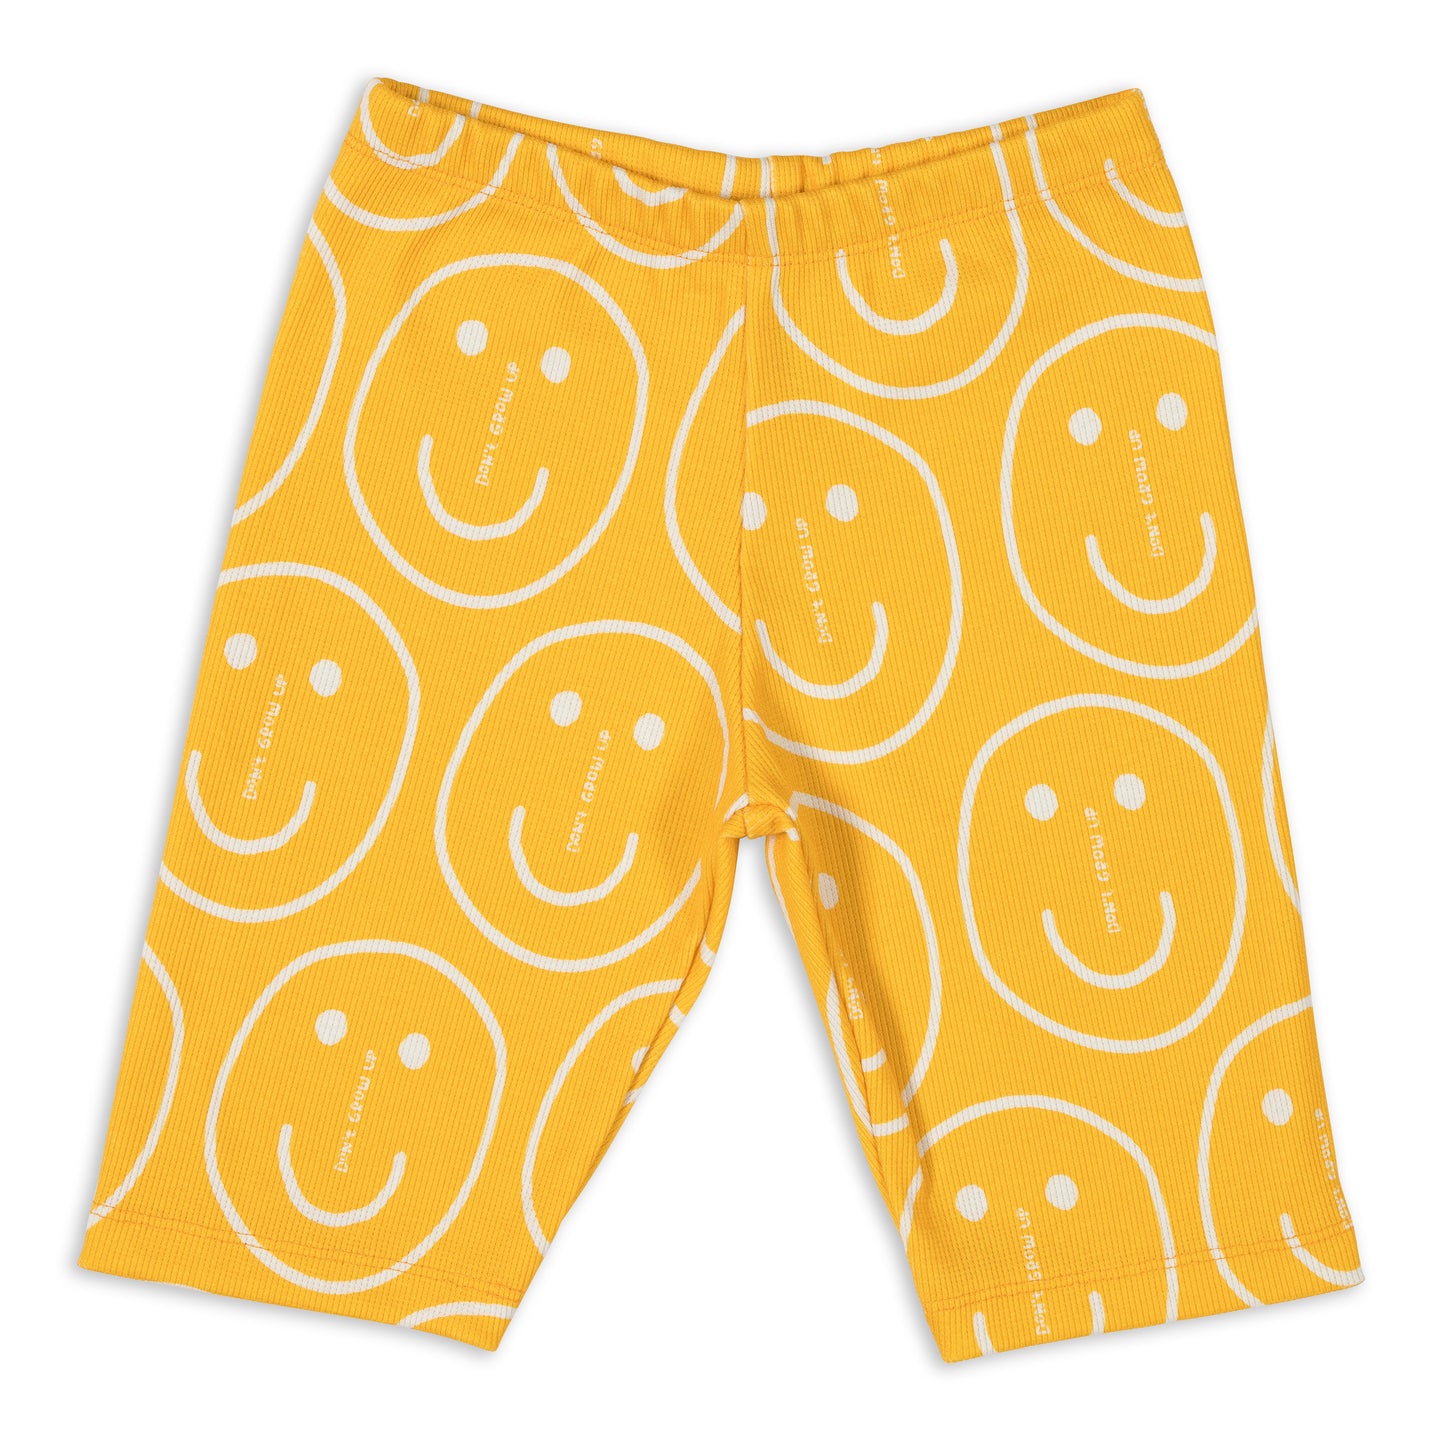 DON'T FORGET TO SMILE ON ORANGE RIBBED CYCLING SHORTS